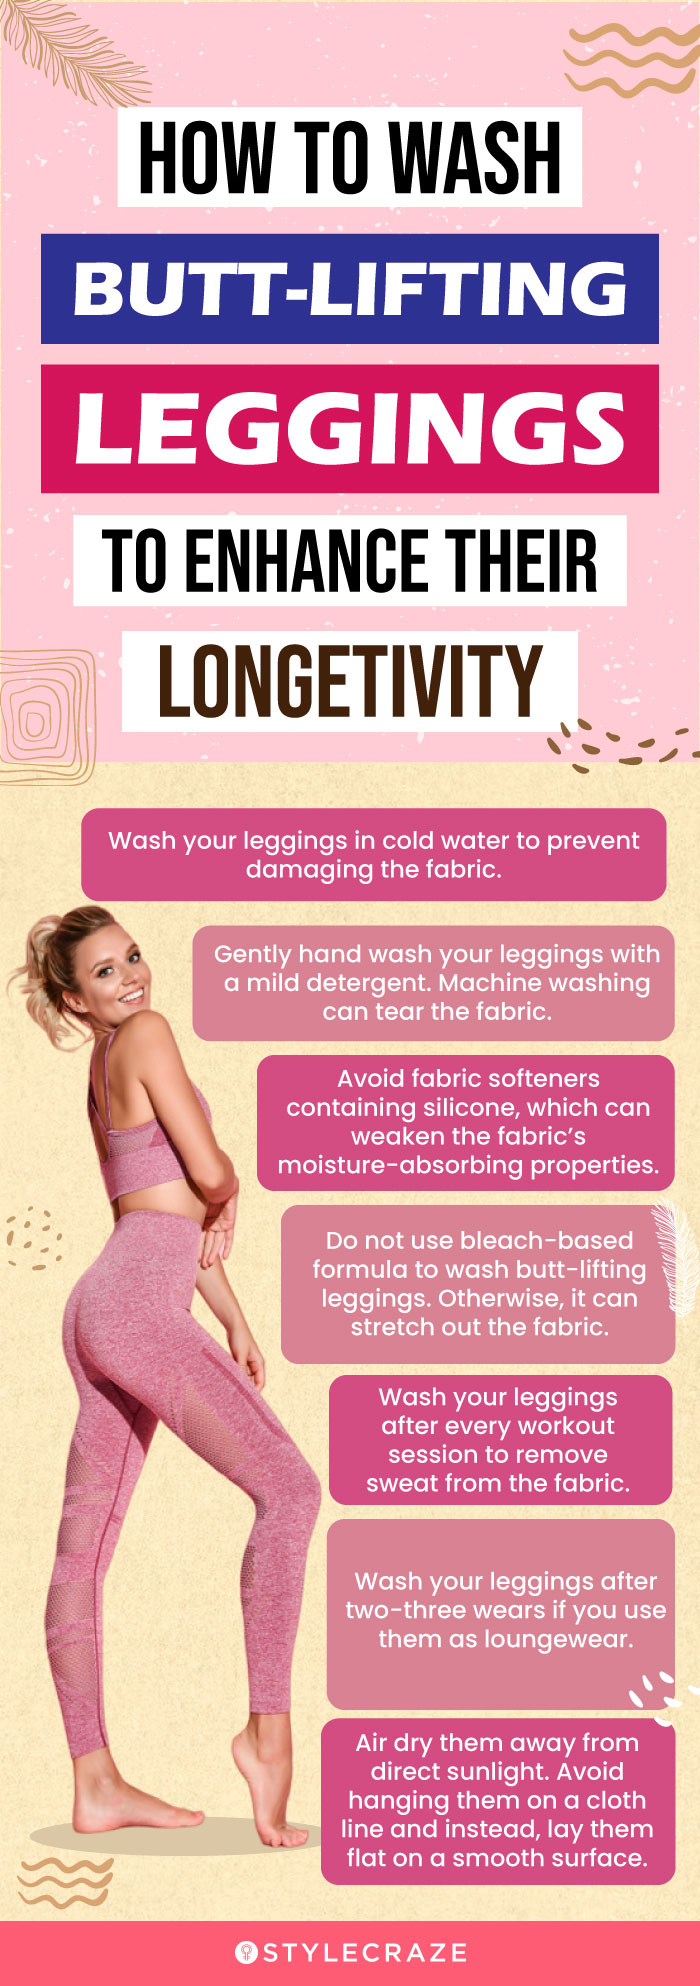 How To Wash Butt-Lifting Leggings To Enhance Their Longevity (infographic)